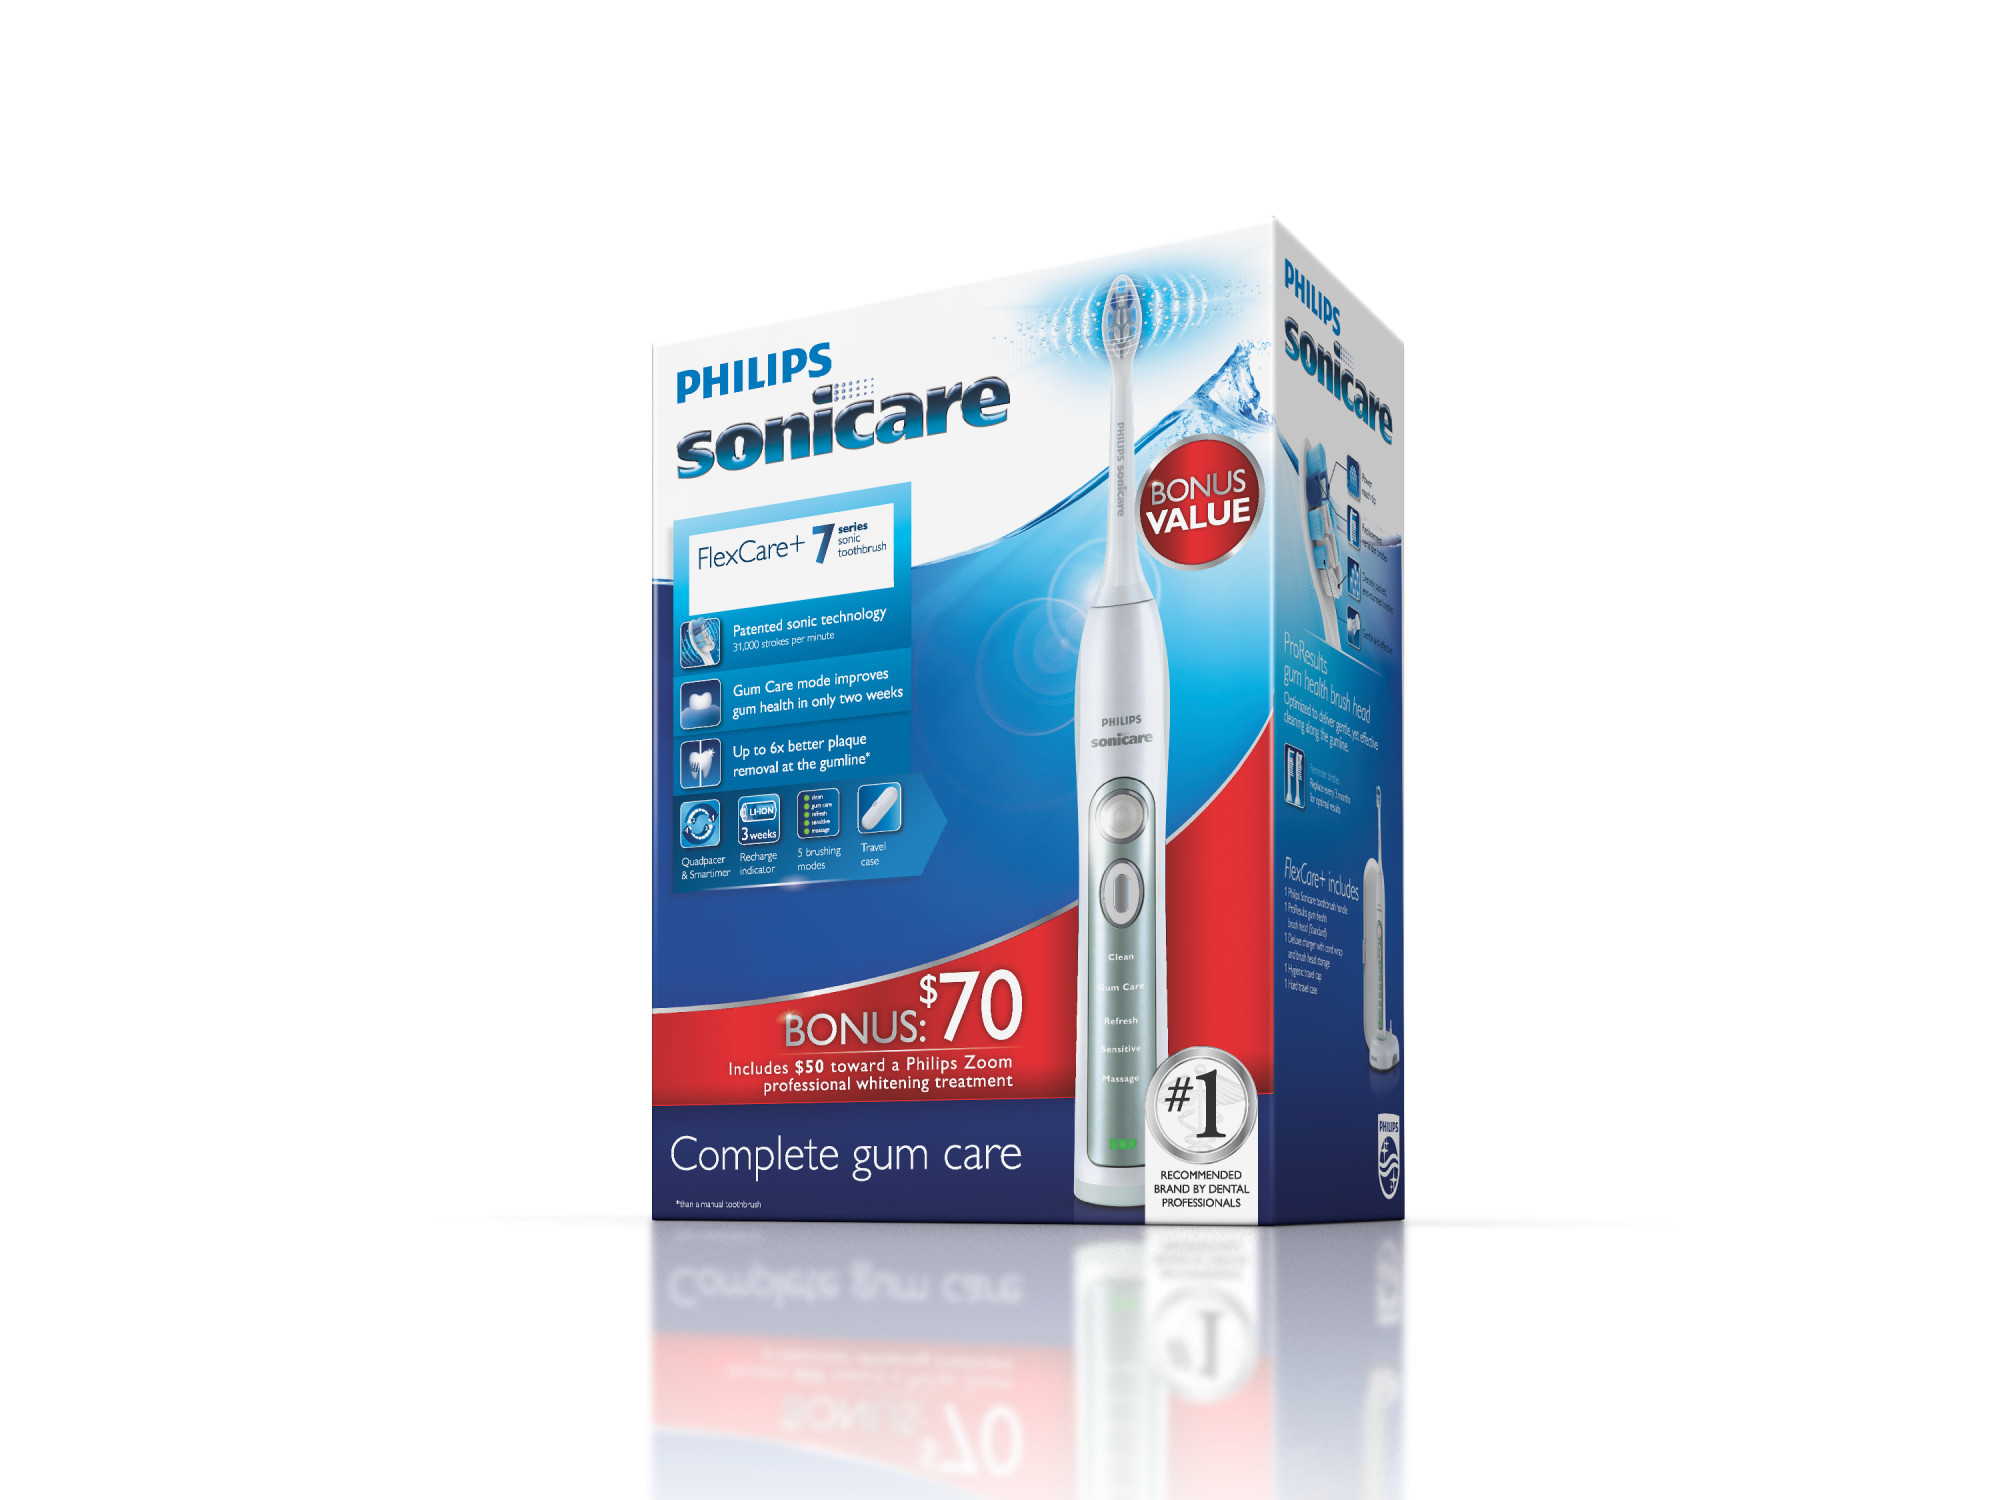 Philips Sonicare Flexcare+ Rechargeable Electric Toothbrush, Hx6921 - image 2 of 2